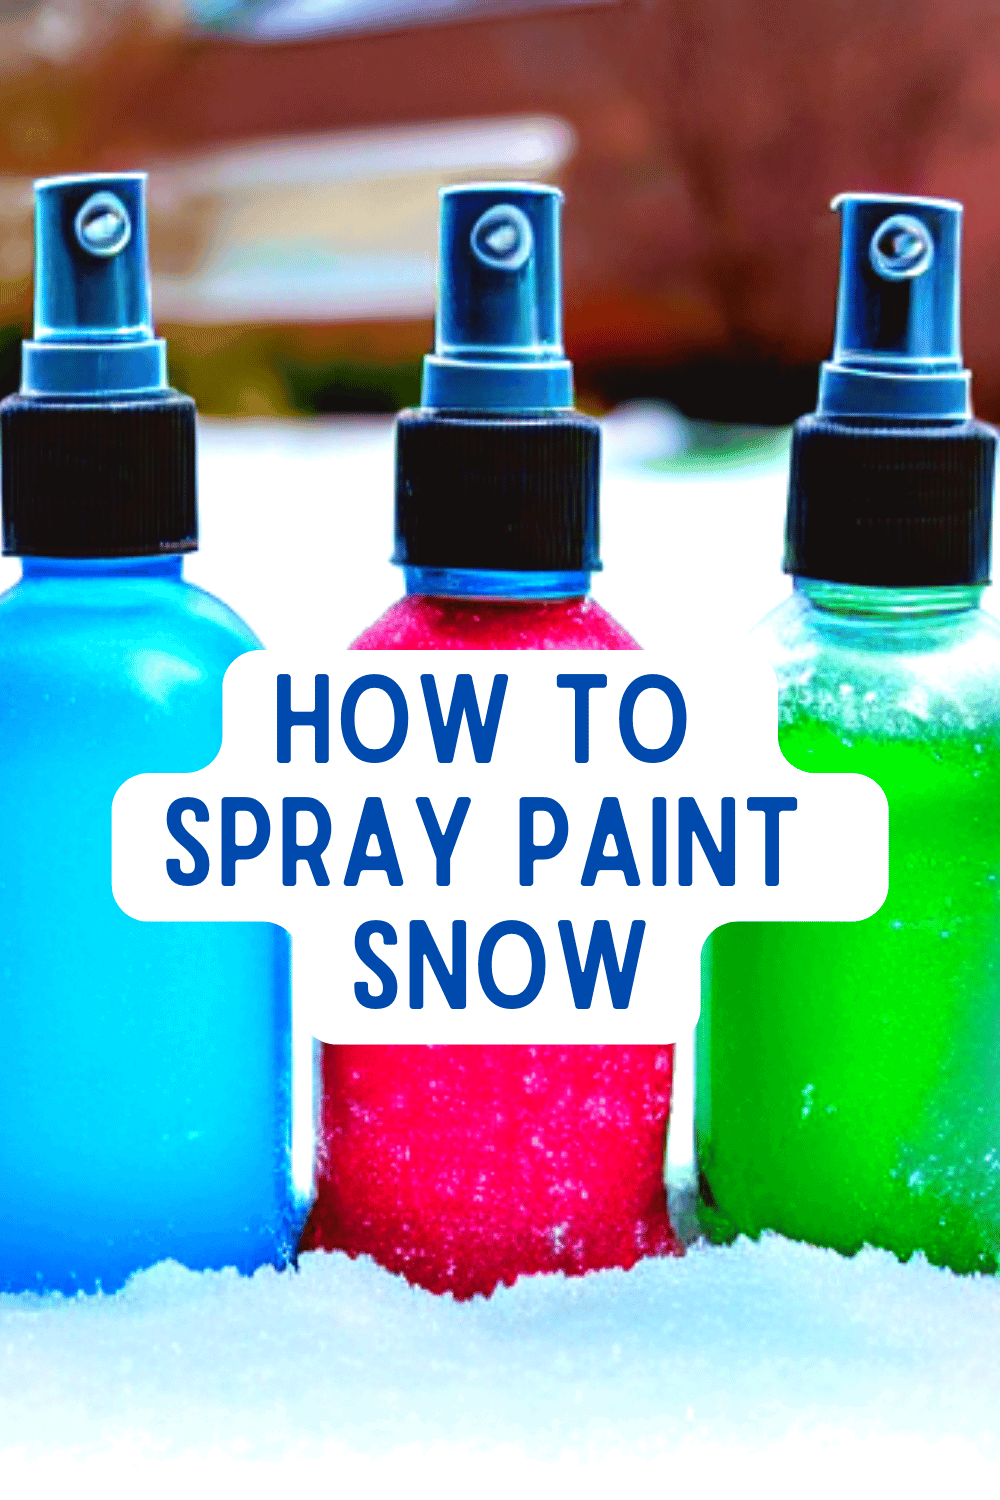 Snow Day Painting With Food Colors (snowy painting ideas) text over spray bottles with food coloring paint sitting in snow in a backyard